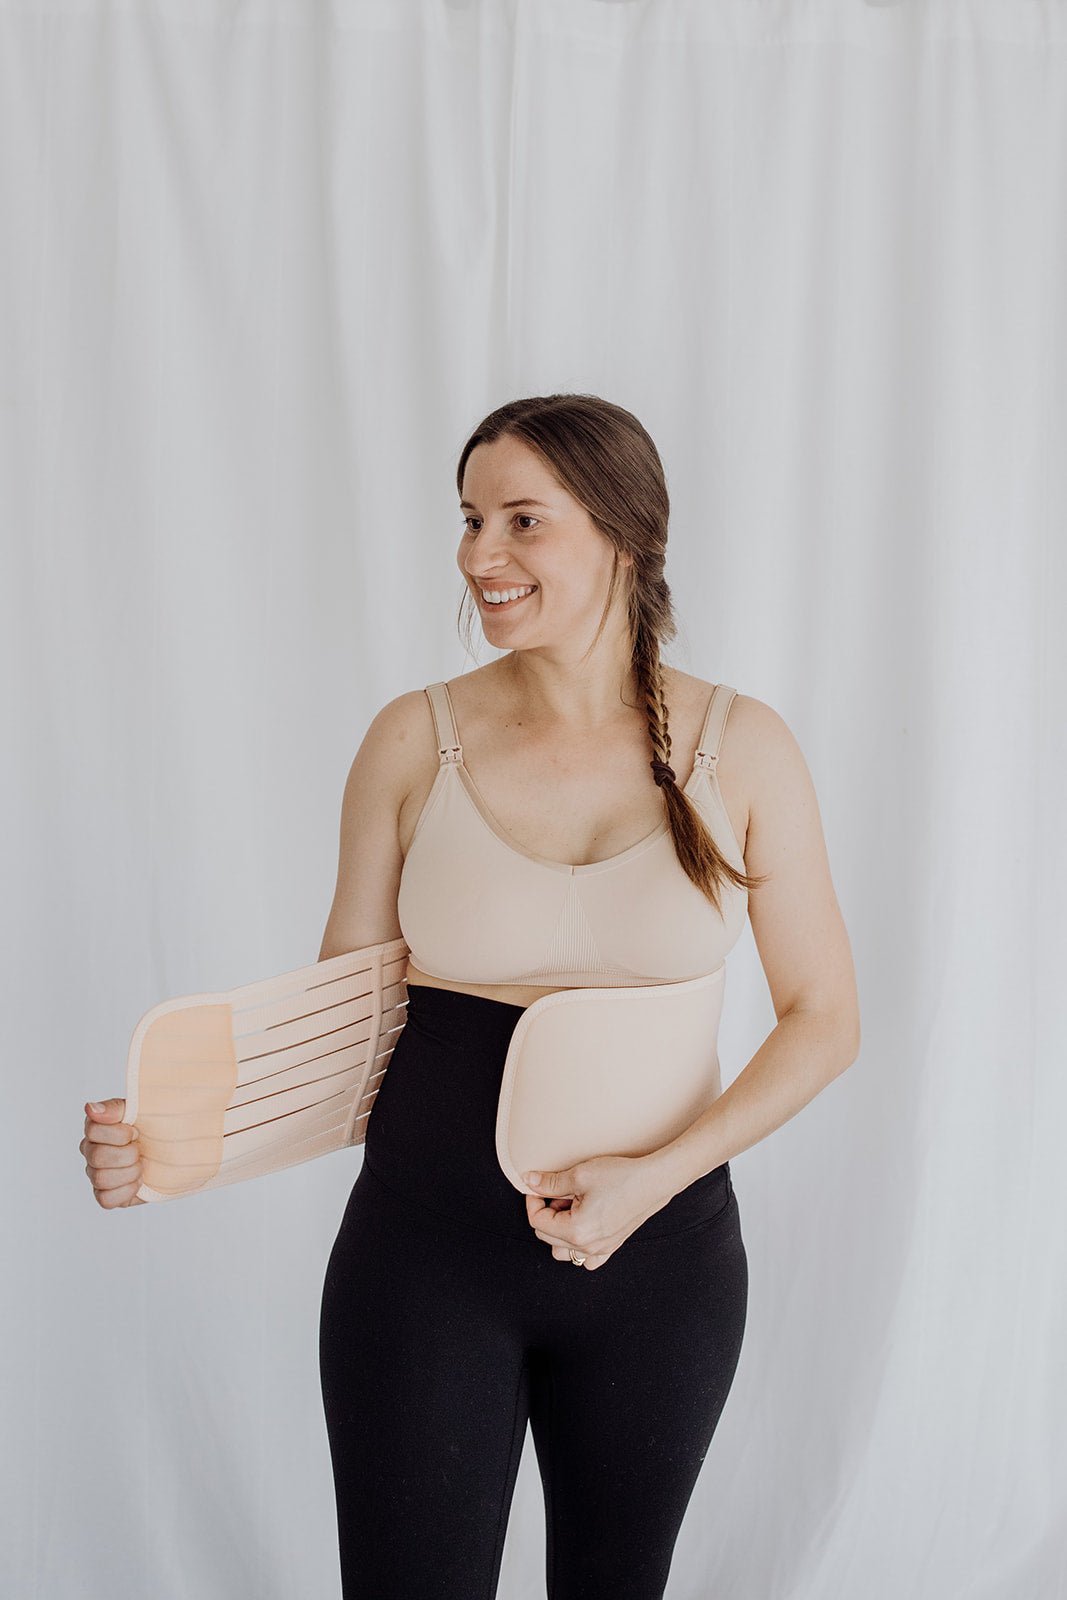 Do I Need A Belly Band Postpartum?